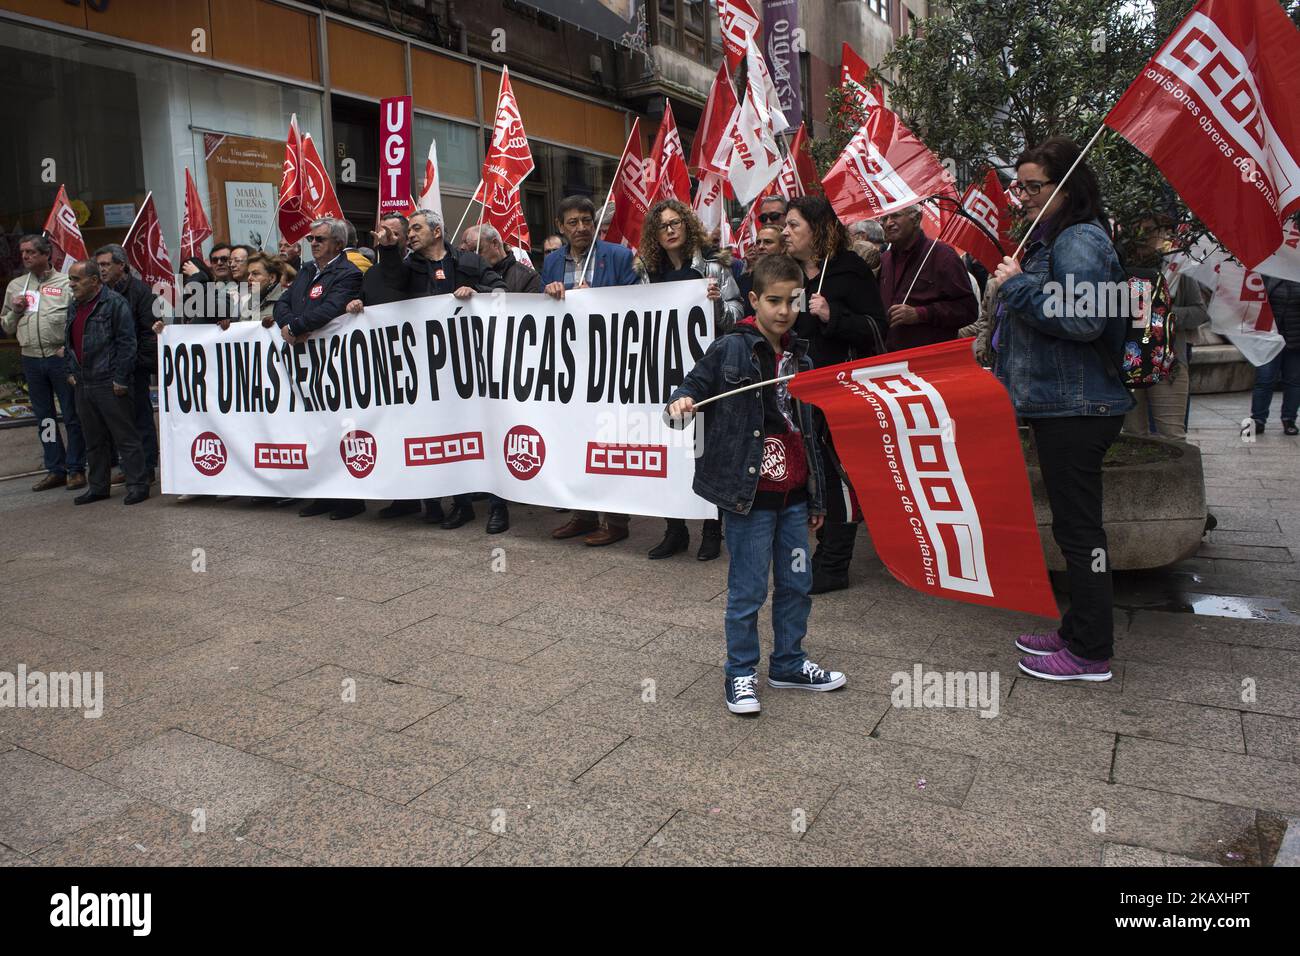 The majority unions (UGT and CCOO) called a demonstration at the national level to claim decent and public pensions in Santander, Spain, on April 15, 2018. More than a thousand people have supported this Sunday, protest and demonstration called by the federations of retirees and pensioners of UGT and CCOO in Cantabria in defense of 'decent public pensions.' The march is the second one since last year when unions began the mobilizations for a 'decent pensions' between the Plaza Numancia and the Pereda Gardens. (Photo by Joaquin Gomez Sastre/NurPhoto) Stock Photo